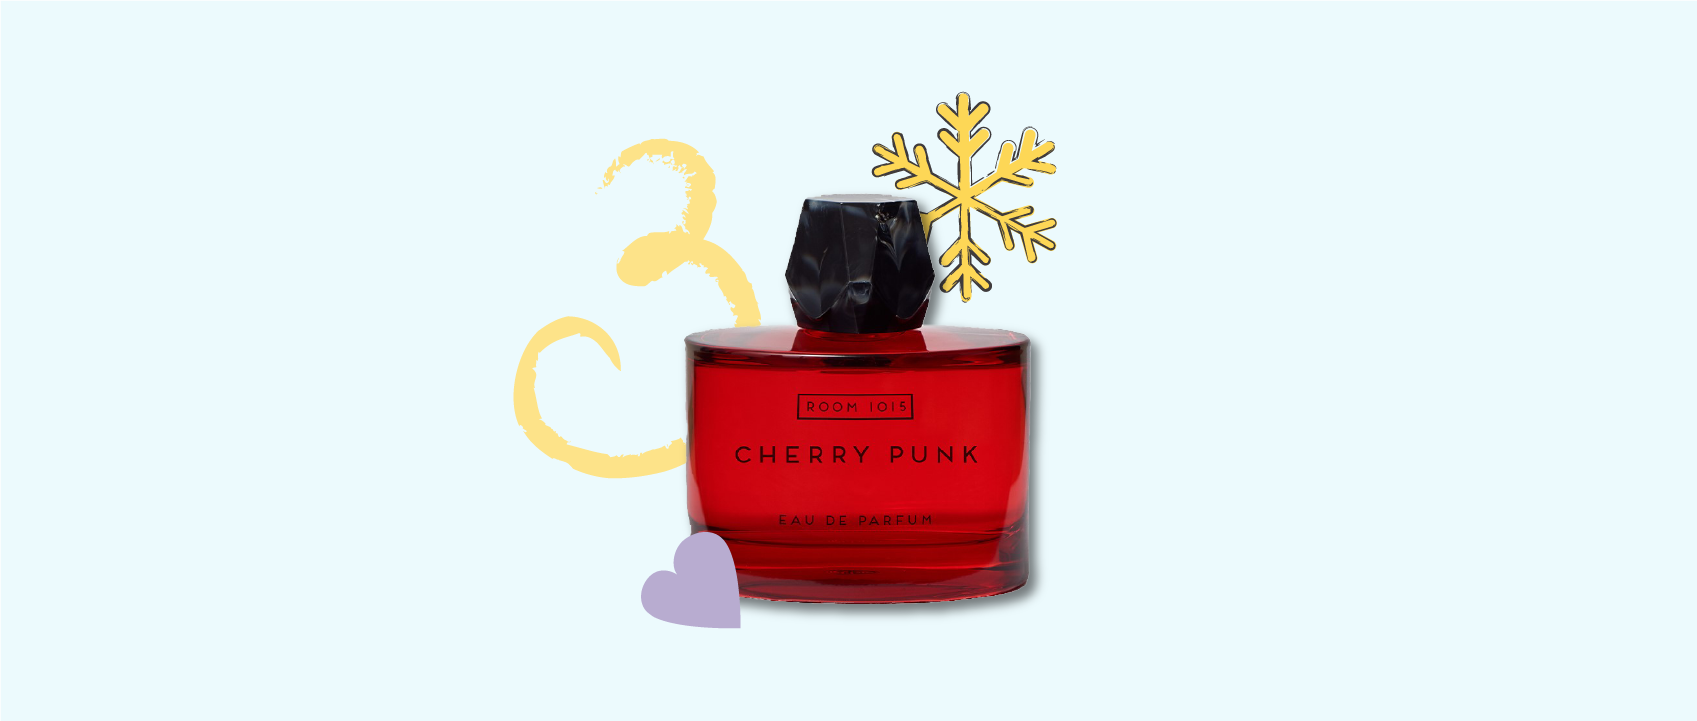 bottle of cherry punk by room 1015 perfume fragrance